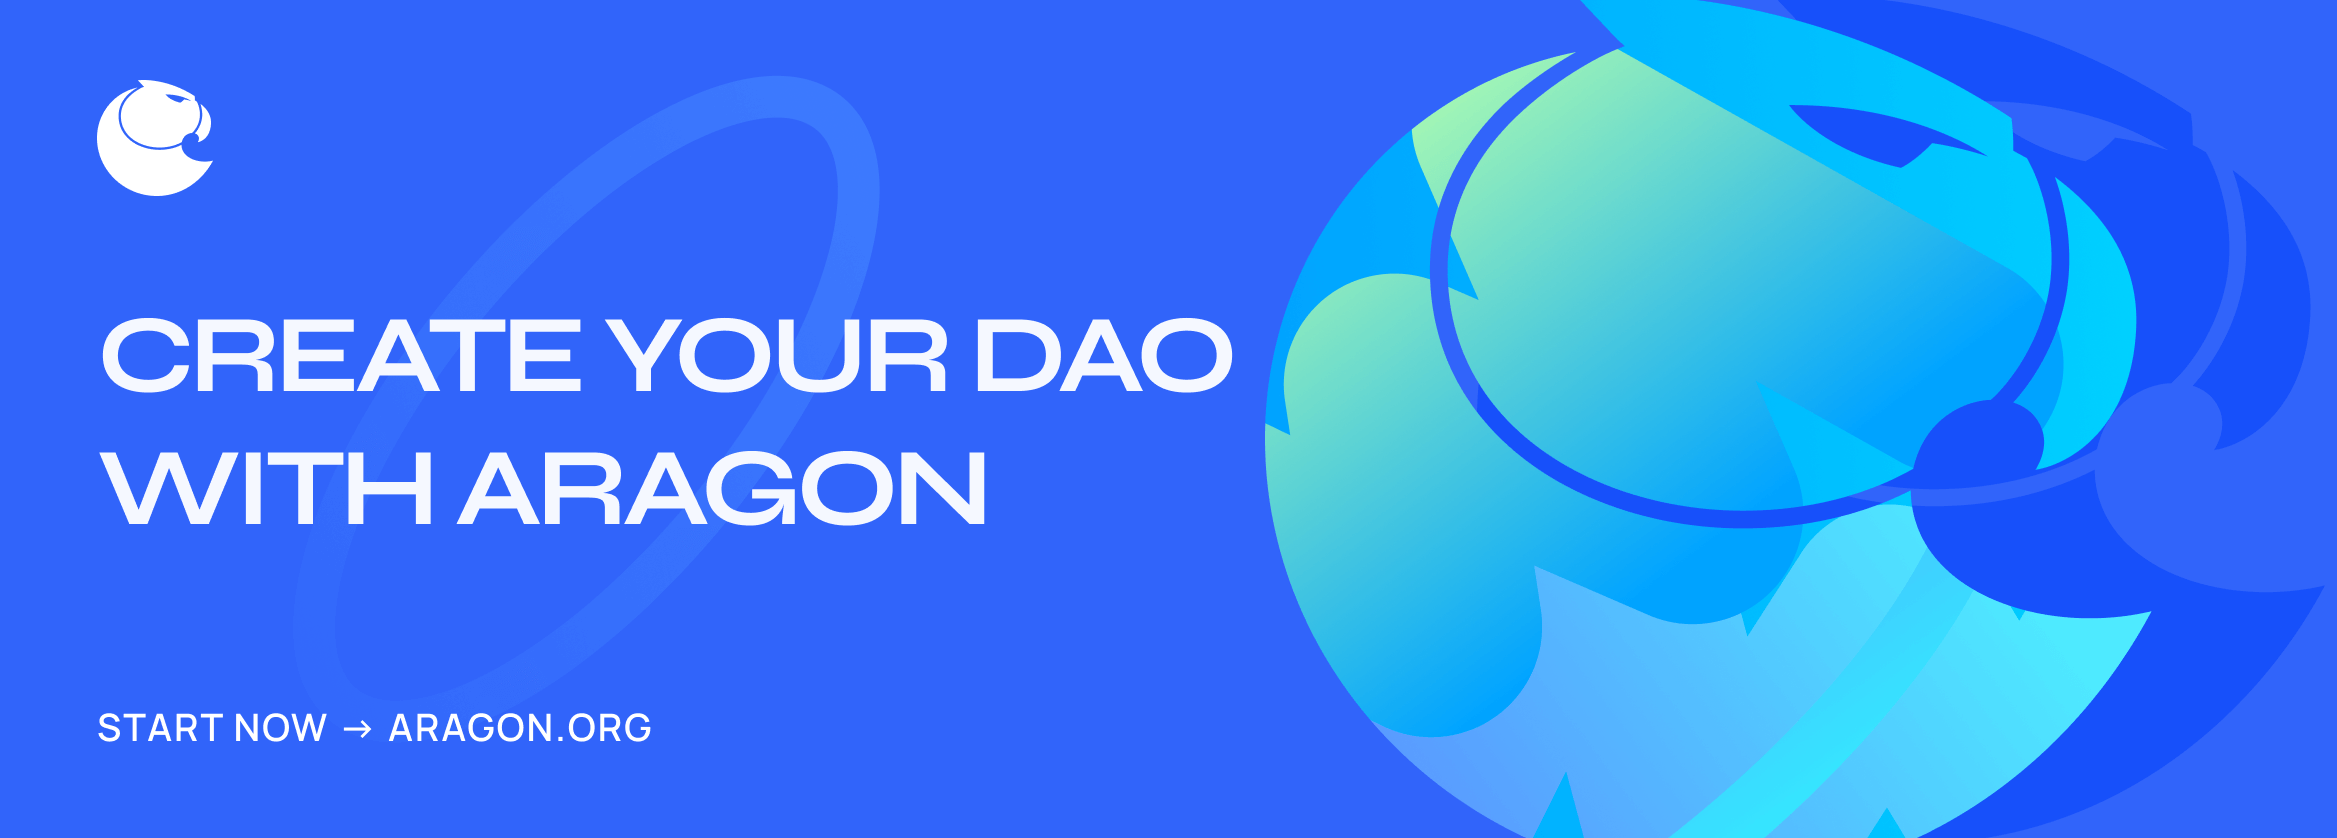 Create your DAO with Aragon